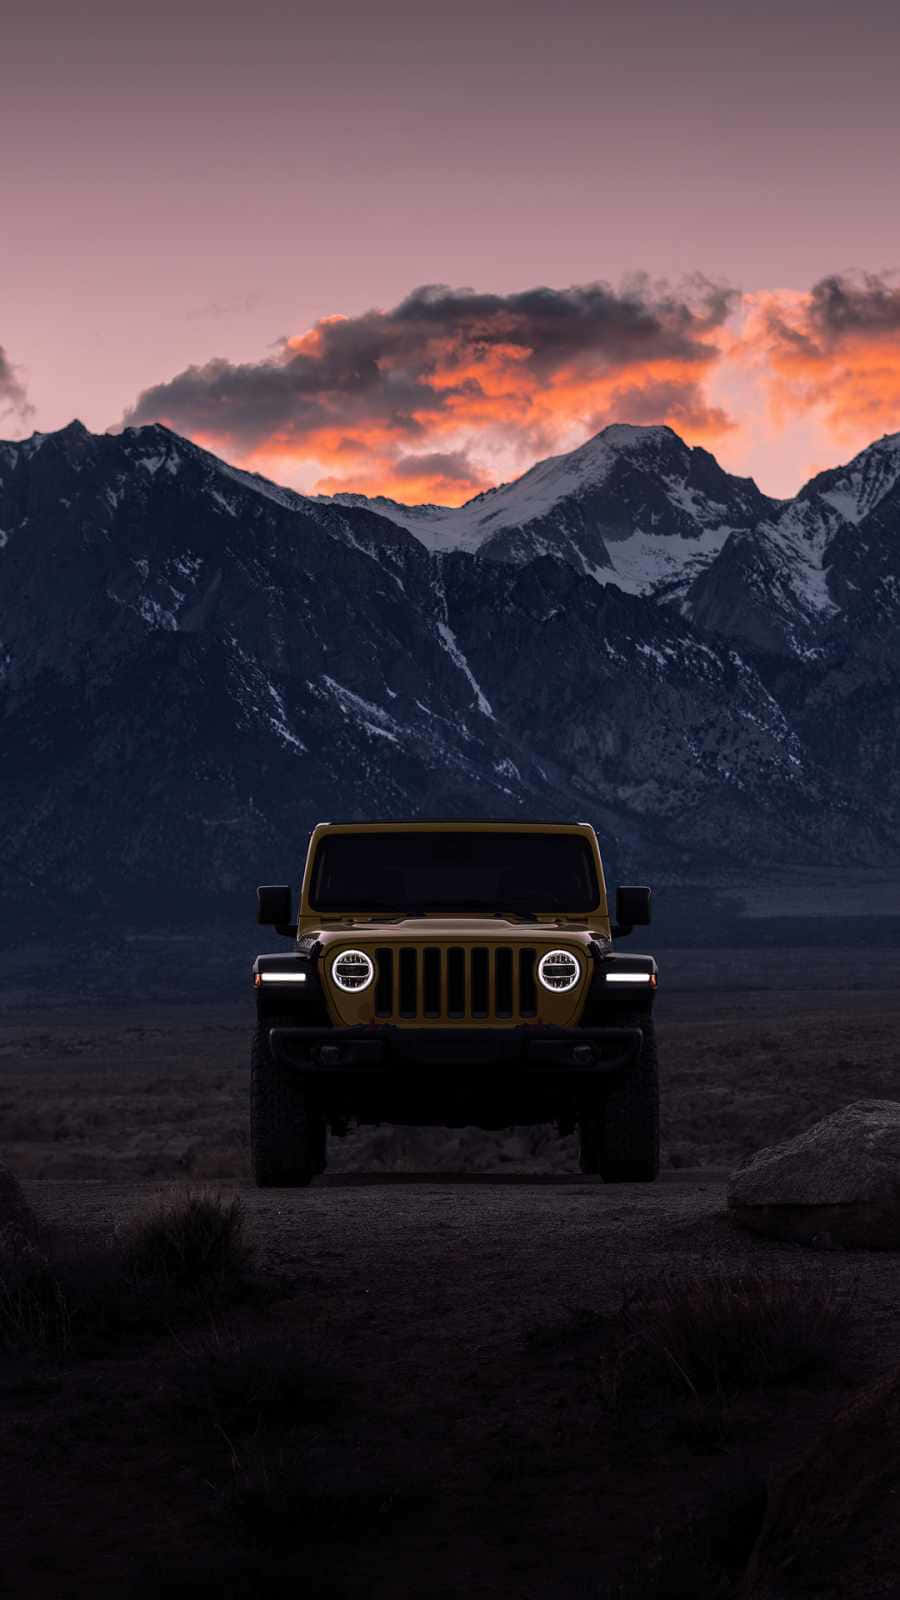 The Jeep Wrangler Is Parked In The Desert At Sunset